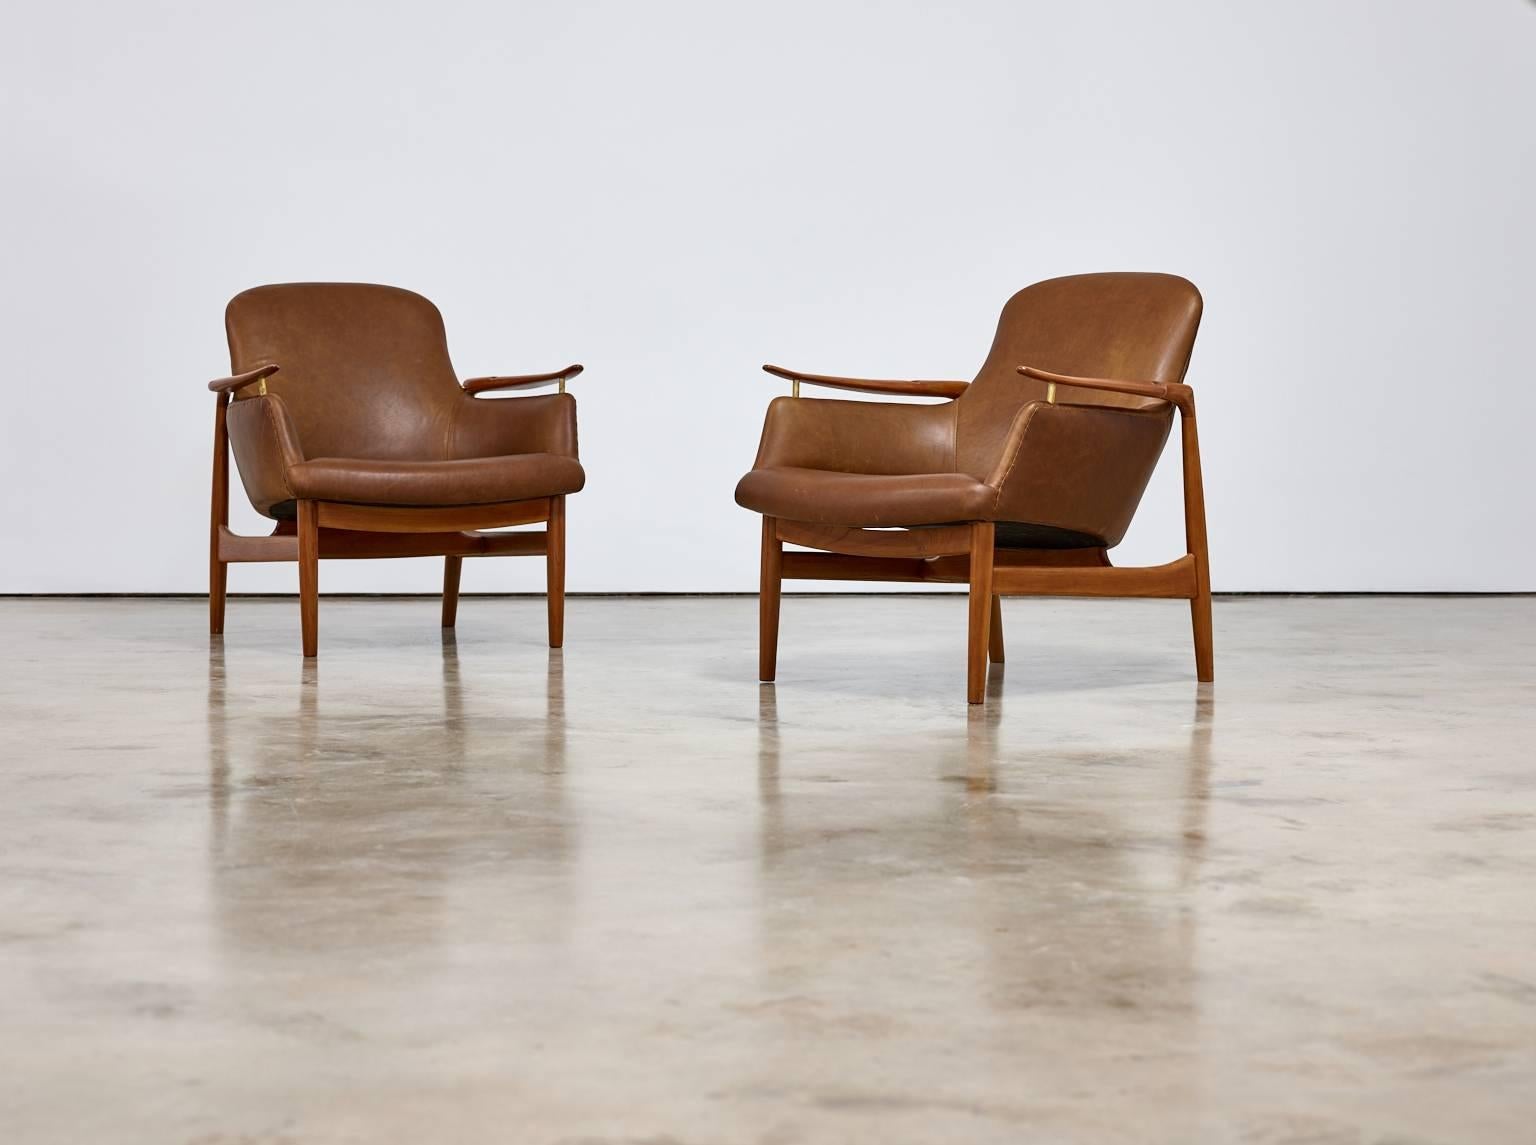 Mid-20th Century Finn Juhl Pair of Armchairs by Niels Vodder, Model NV53 in Leather, 1950s